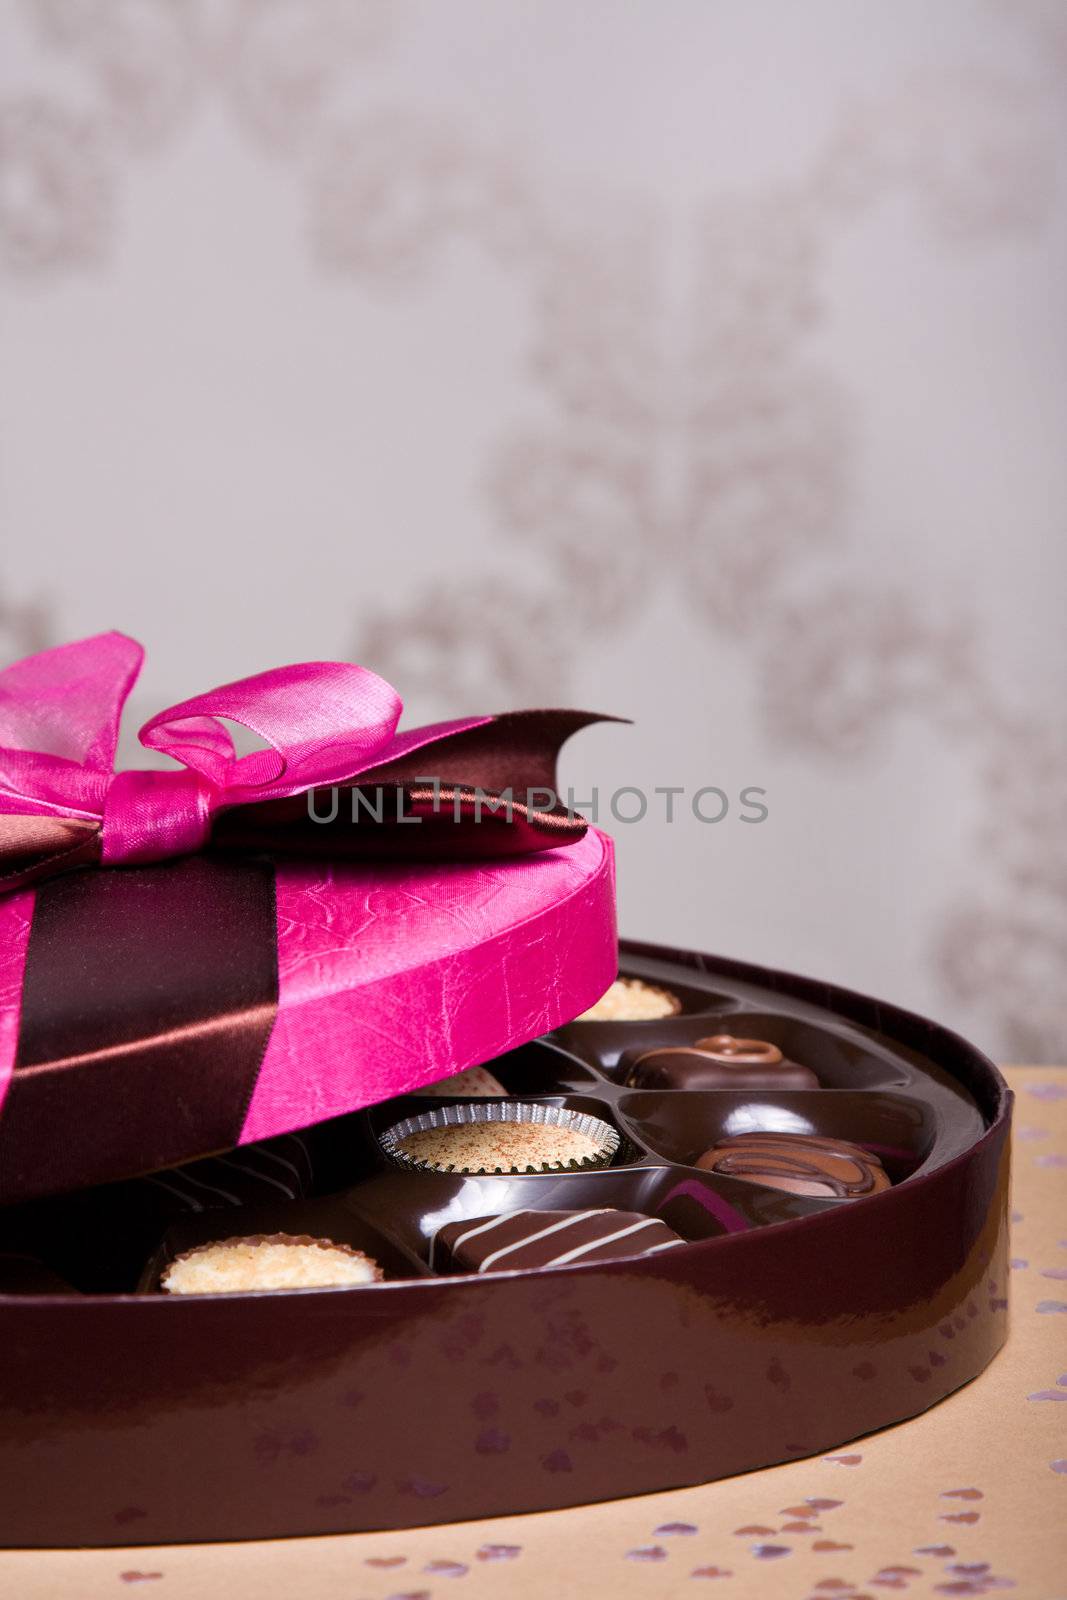 Luxury chocolates with a pink satin lid